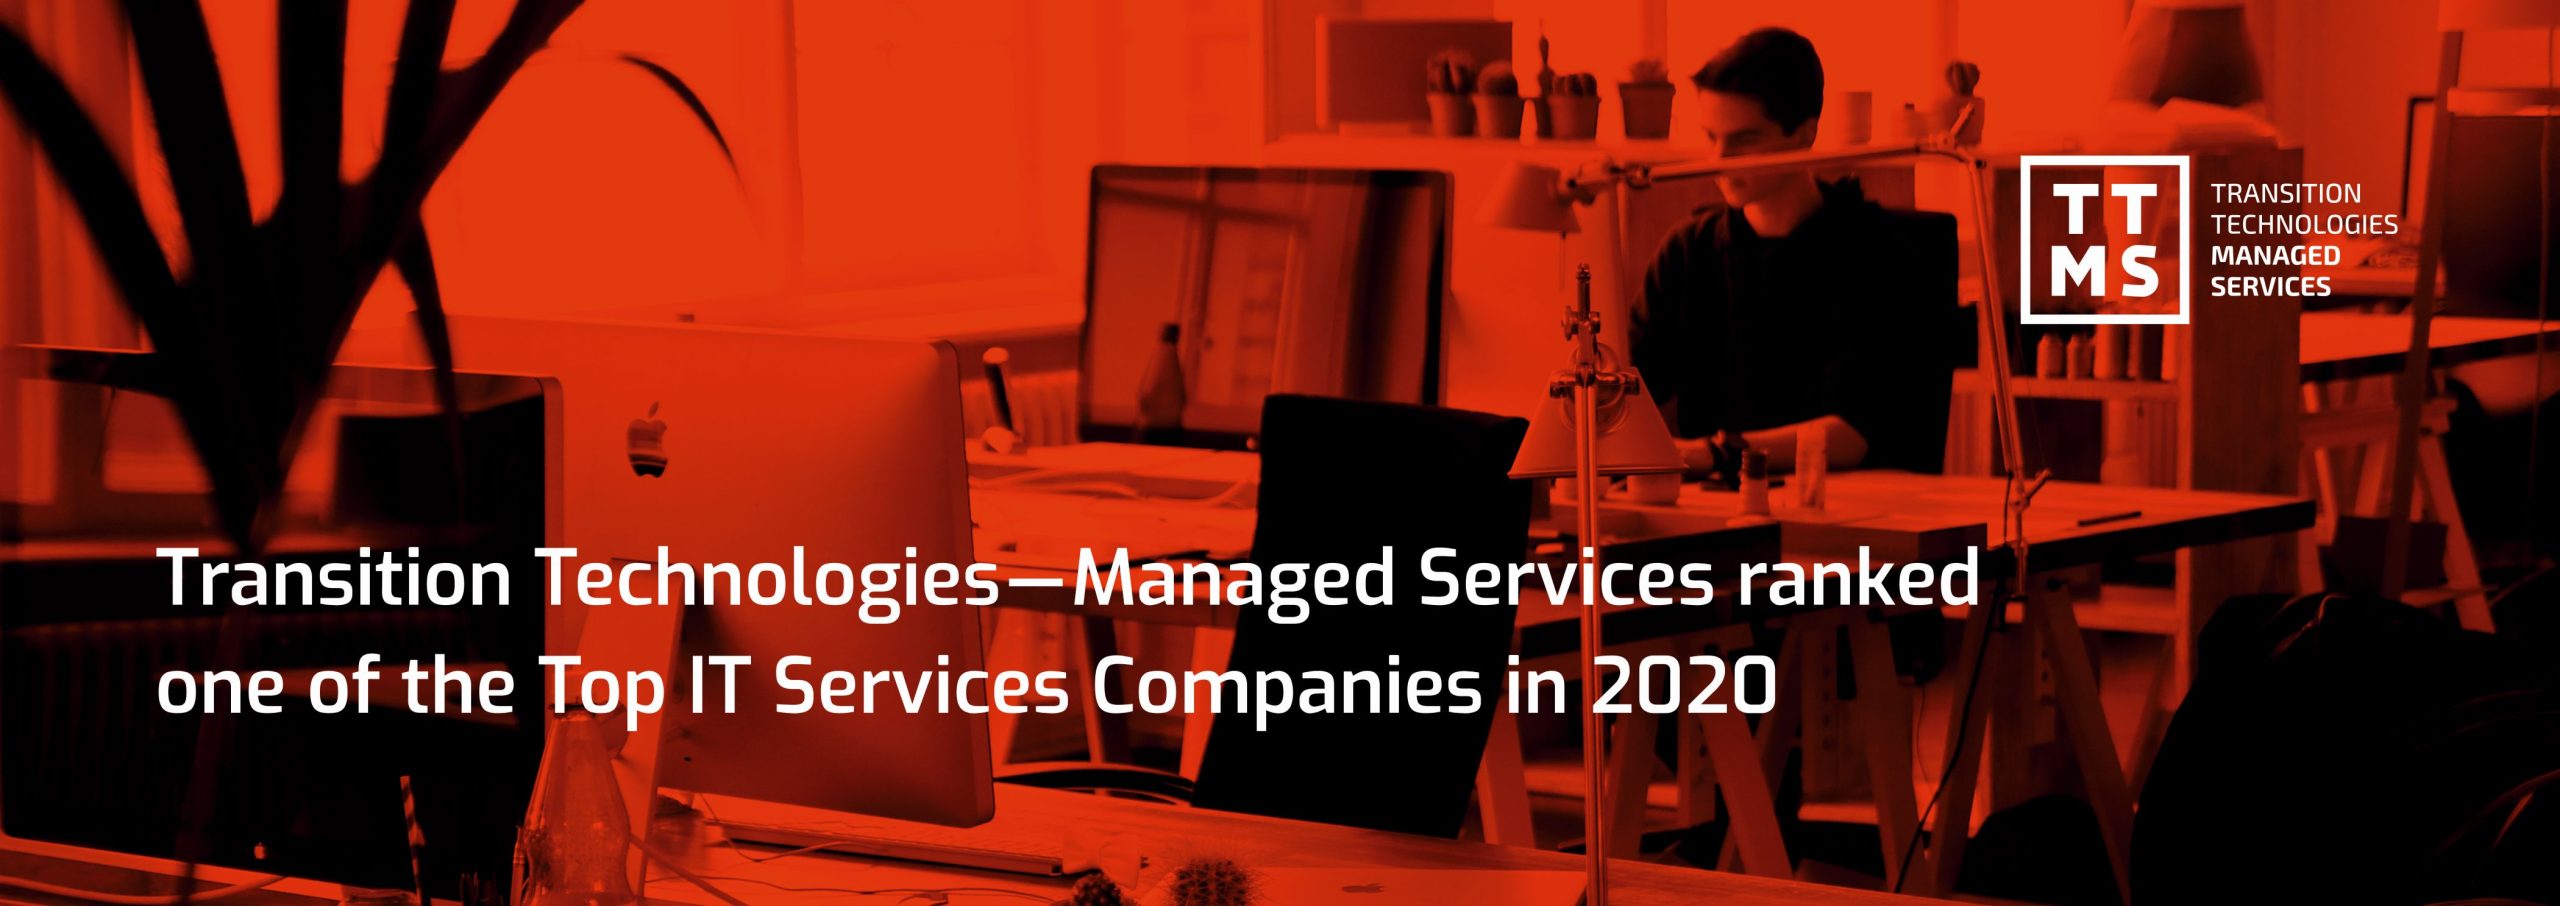 Transition Technologies — Managed Services Ranked One of the Top IT Services Companies in 2020